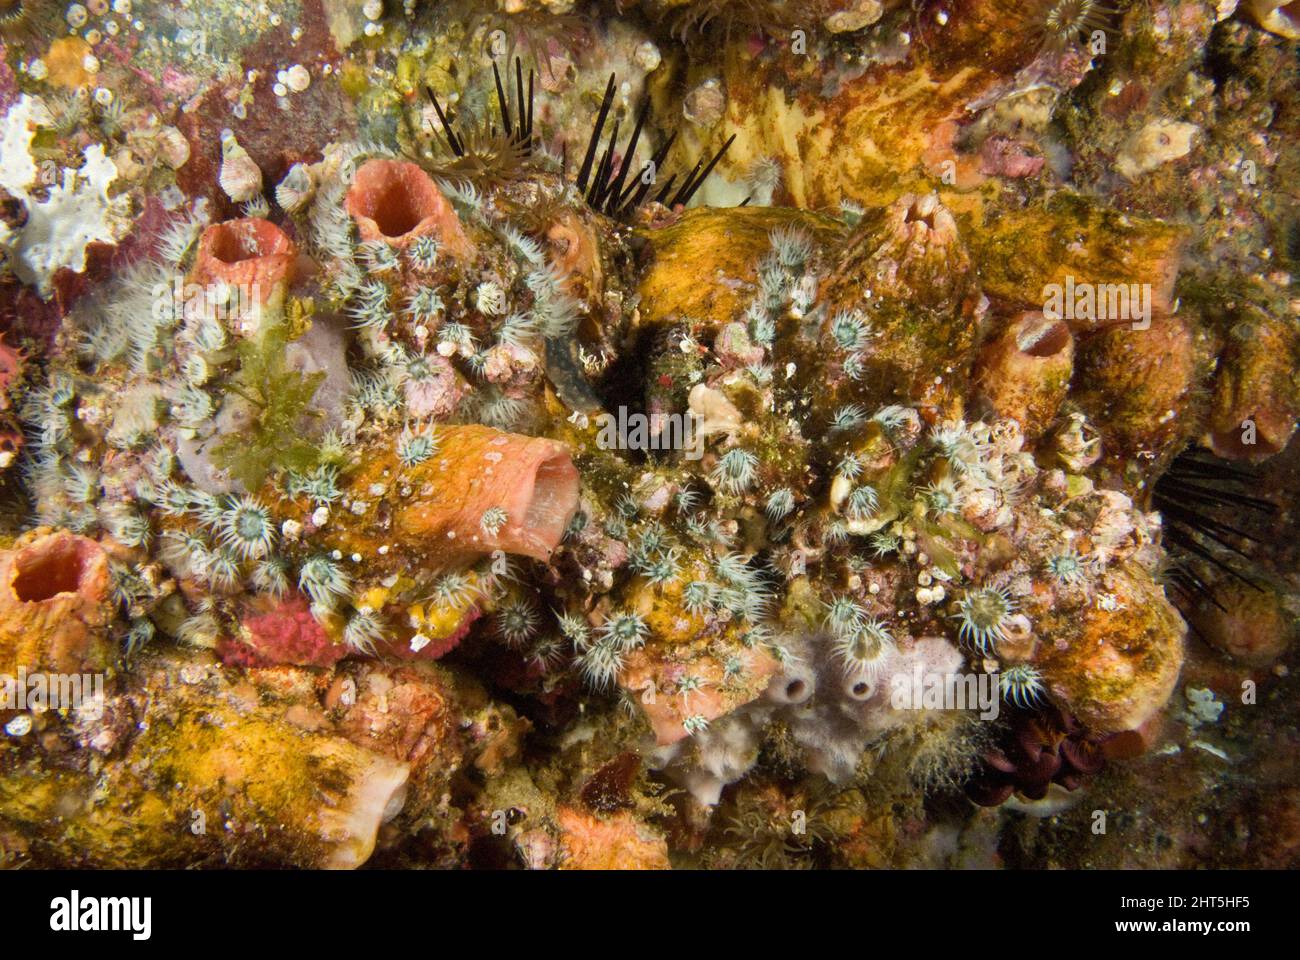 Solitary ascidians.Herdmania momus encrusted with growth. The most common species observed subtidally in southern Australian waters. Large animals hav Stock Photo